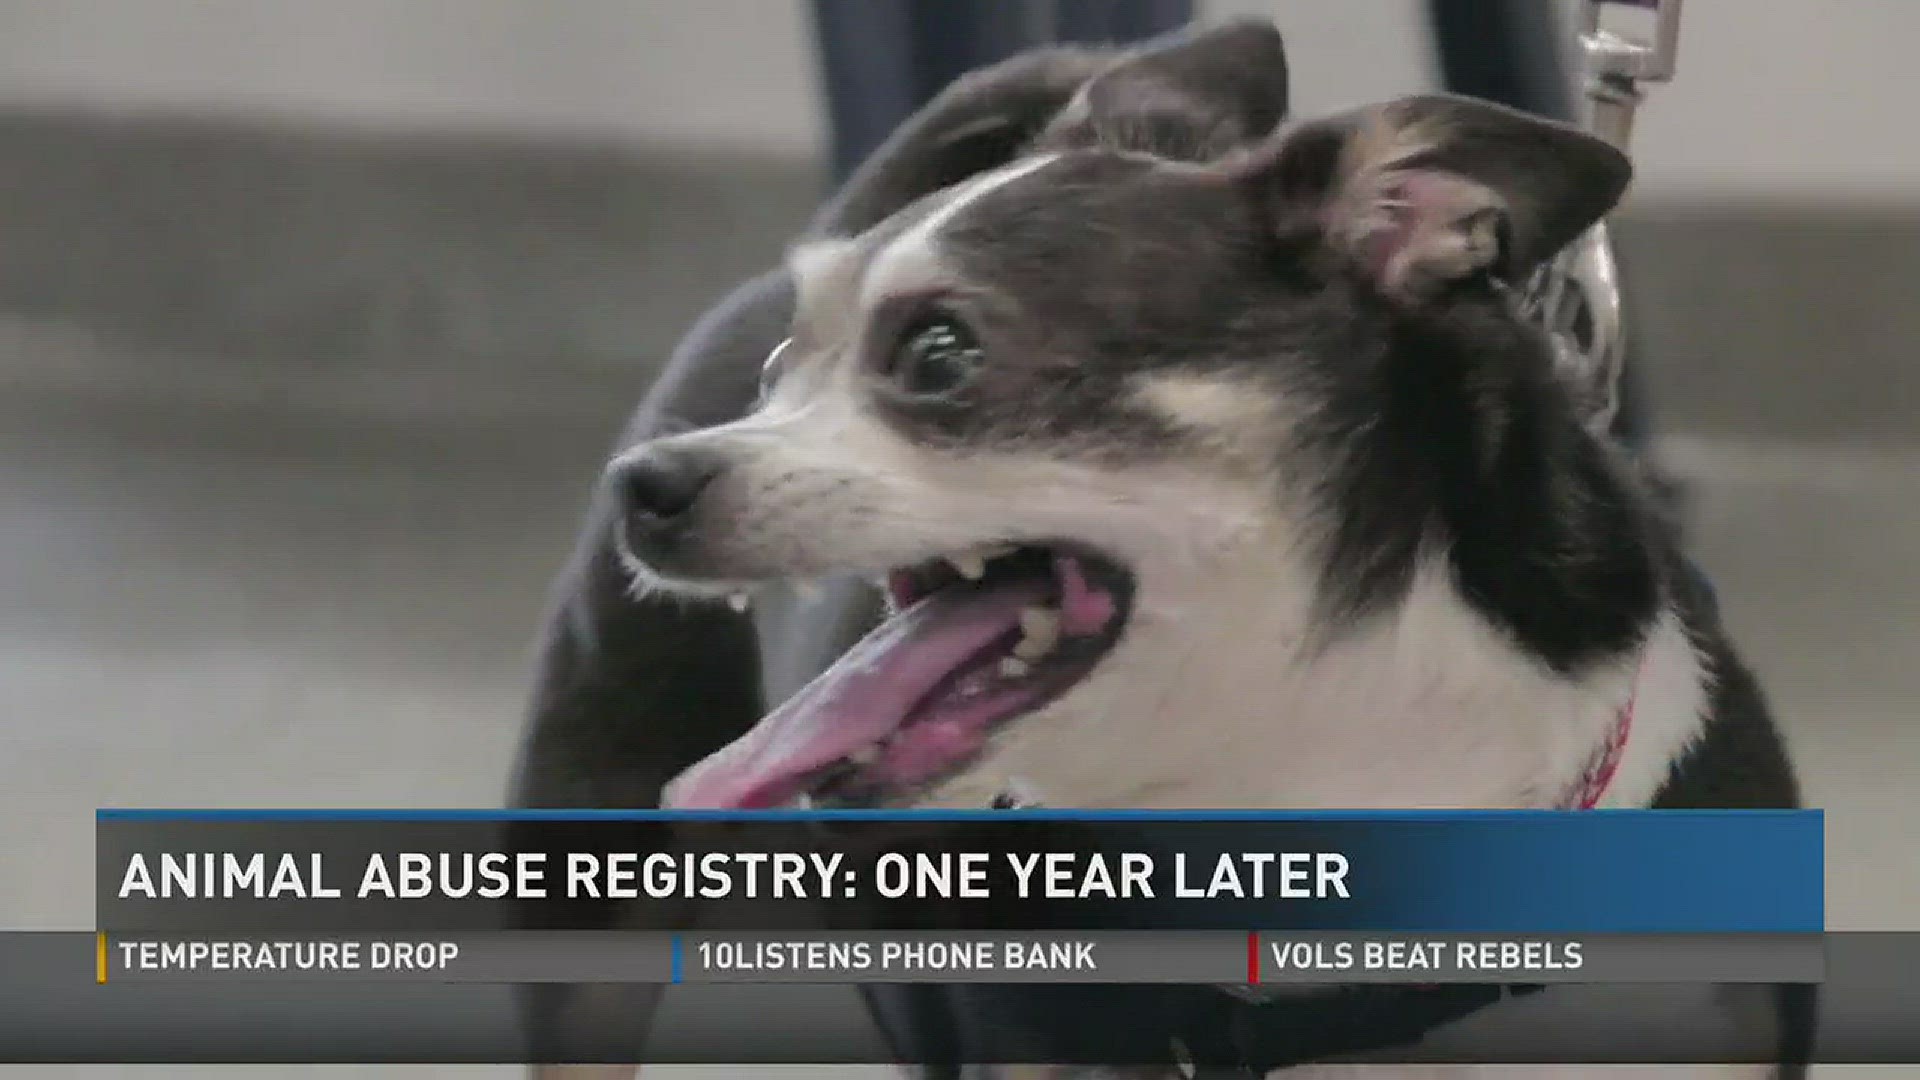 Feb. 8, 2017: A look at the state of Tennessee's Animal Abuse Registry, whether the registry has served it's purpose in the first year and what if any "loopholes" exist.